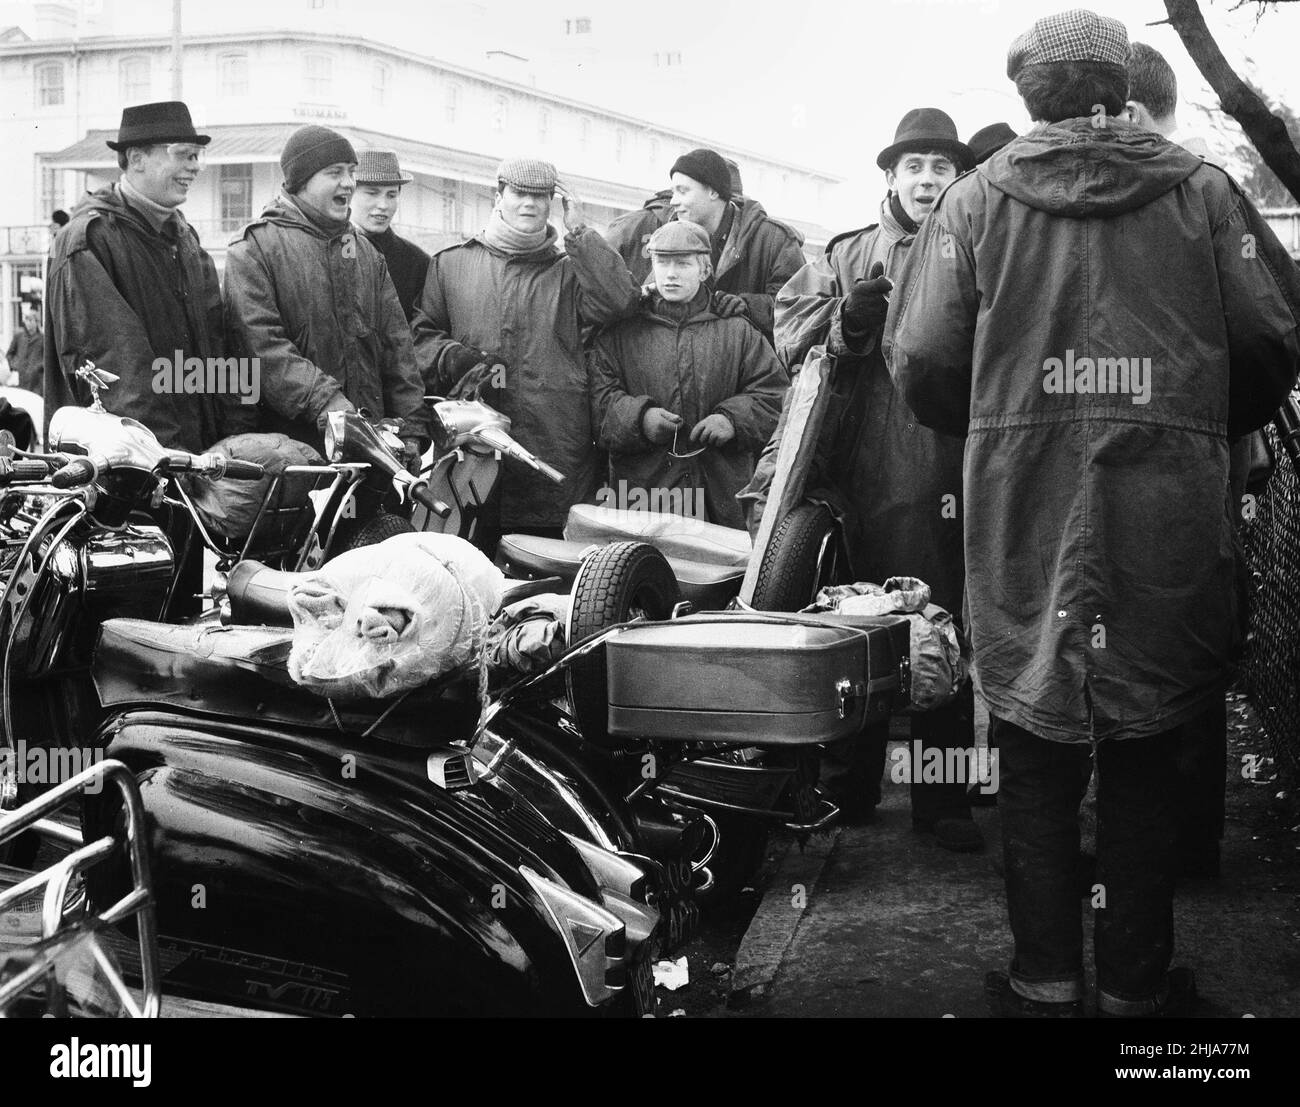 Mods gather on the sea front at Clacton on their scooters over the 1964 Easter weekend, which was marked by several scuffles between Mods and Rockers at the Essex seaside resort. 30th March 1964 Stock Photo